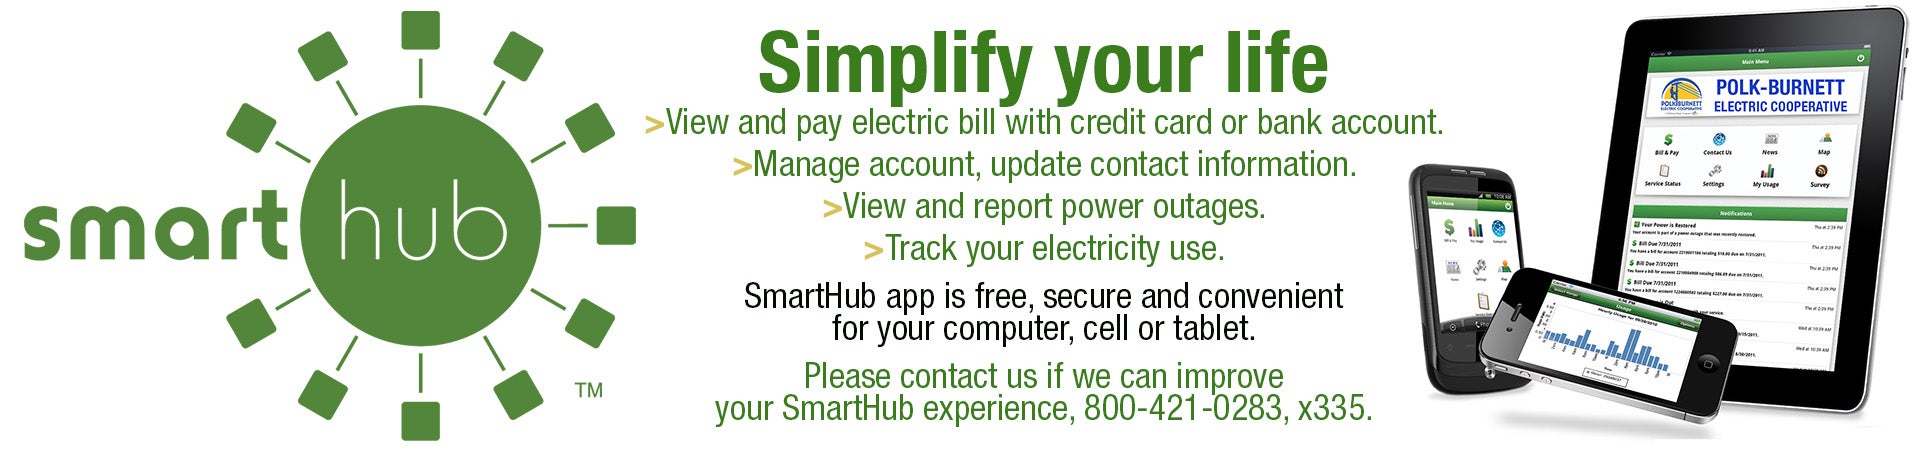 Simplify Your Life with SmartHub